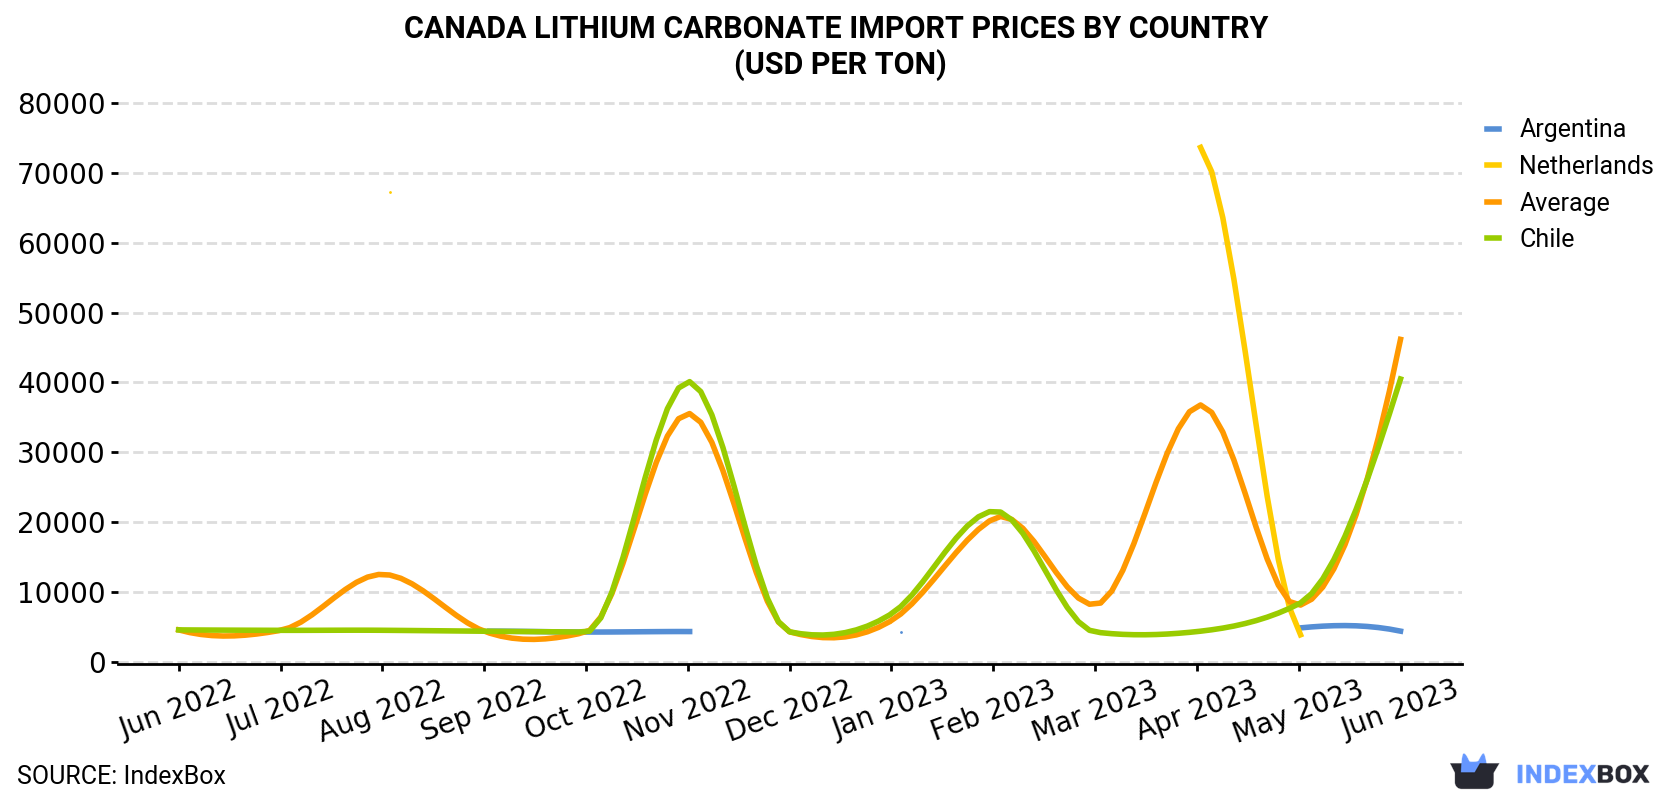 Canada Lithium Carbonate Import Prices By Country (USD Per Ton)